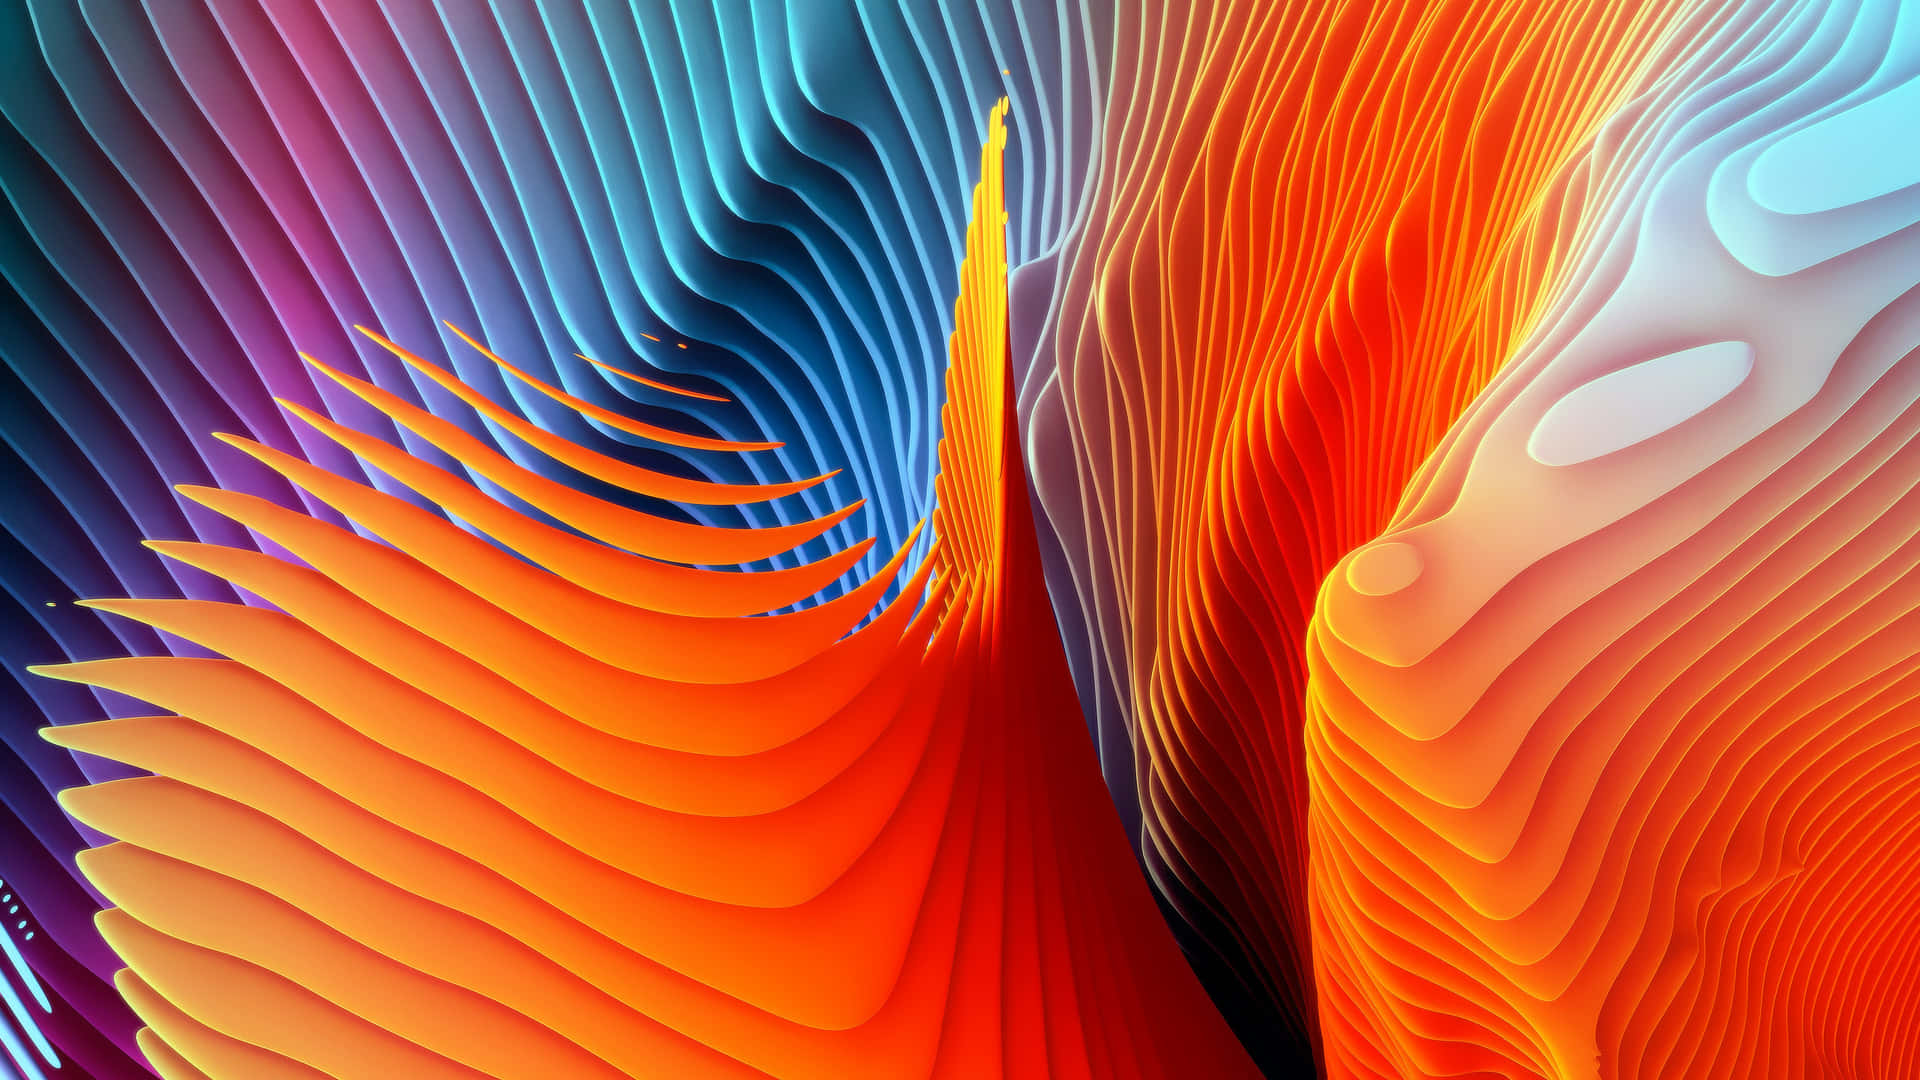 Take delight in the vibrant effects of this Mac background